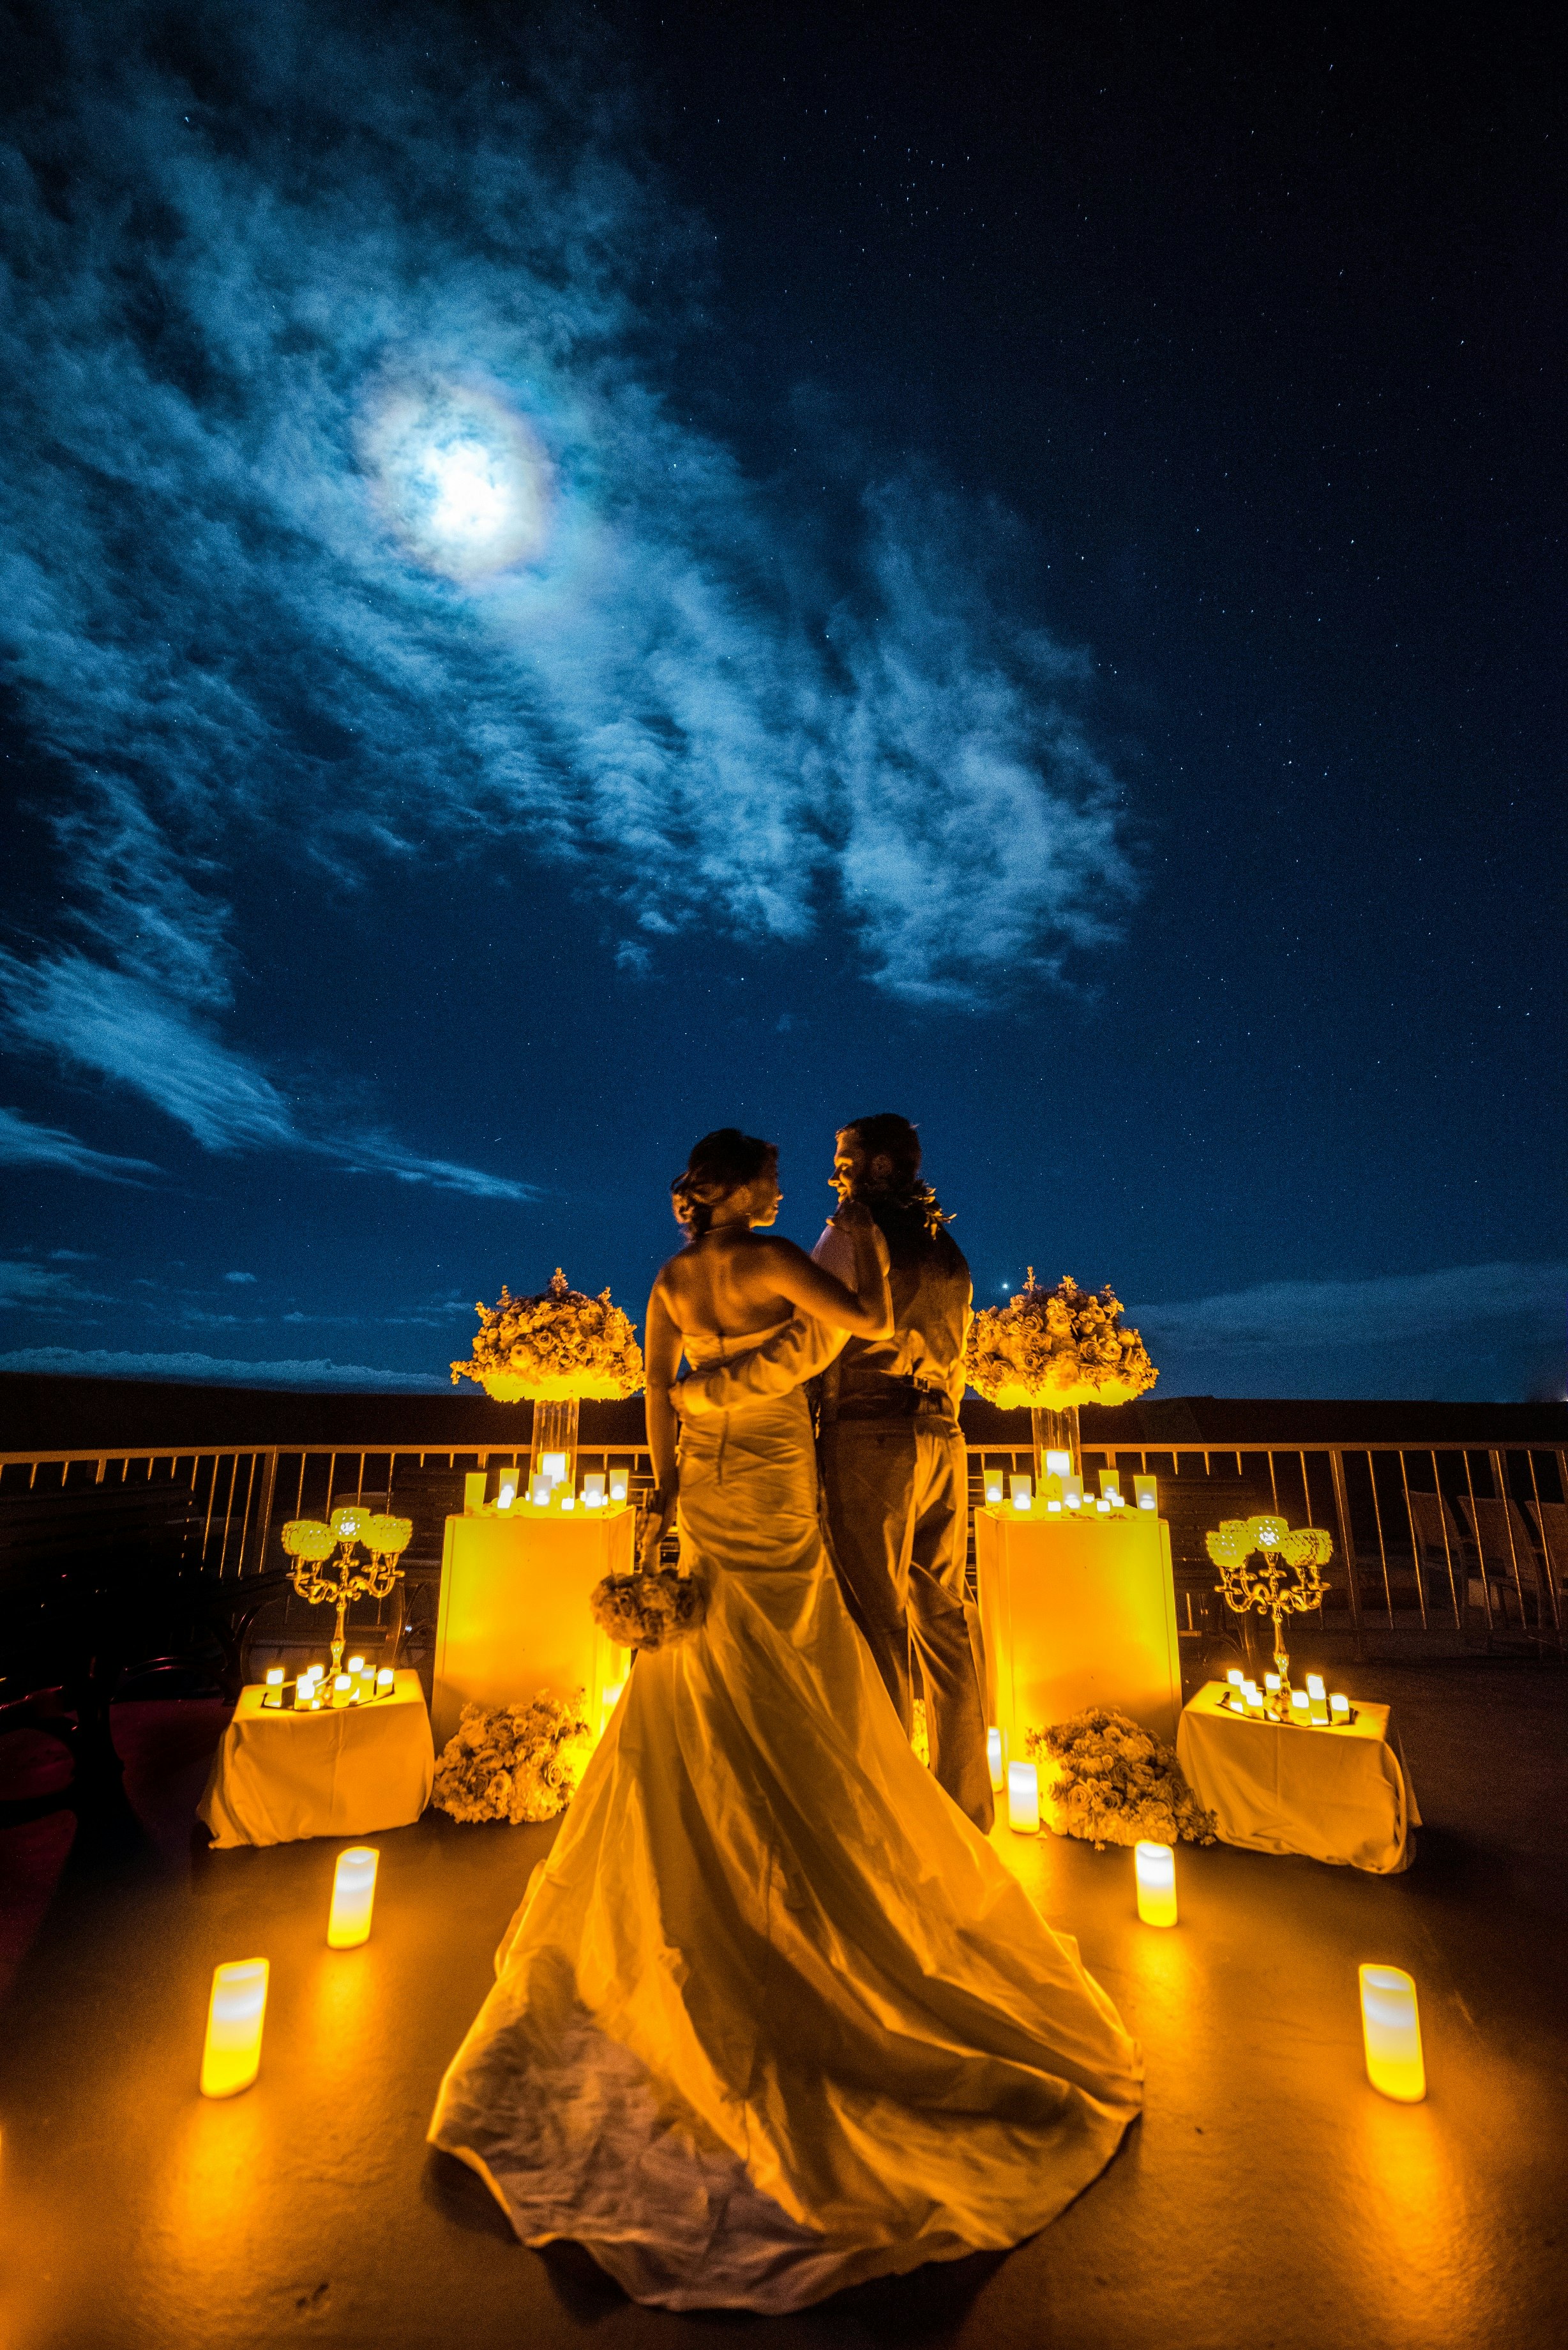 Bridal couple surrounded by candles and flowers under a full moon.jpg